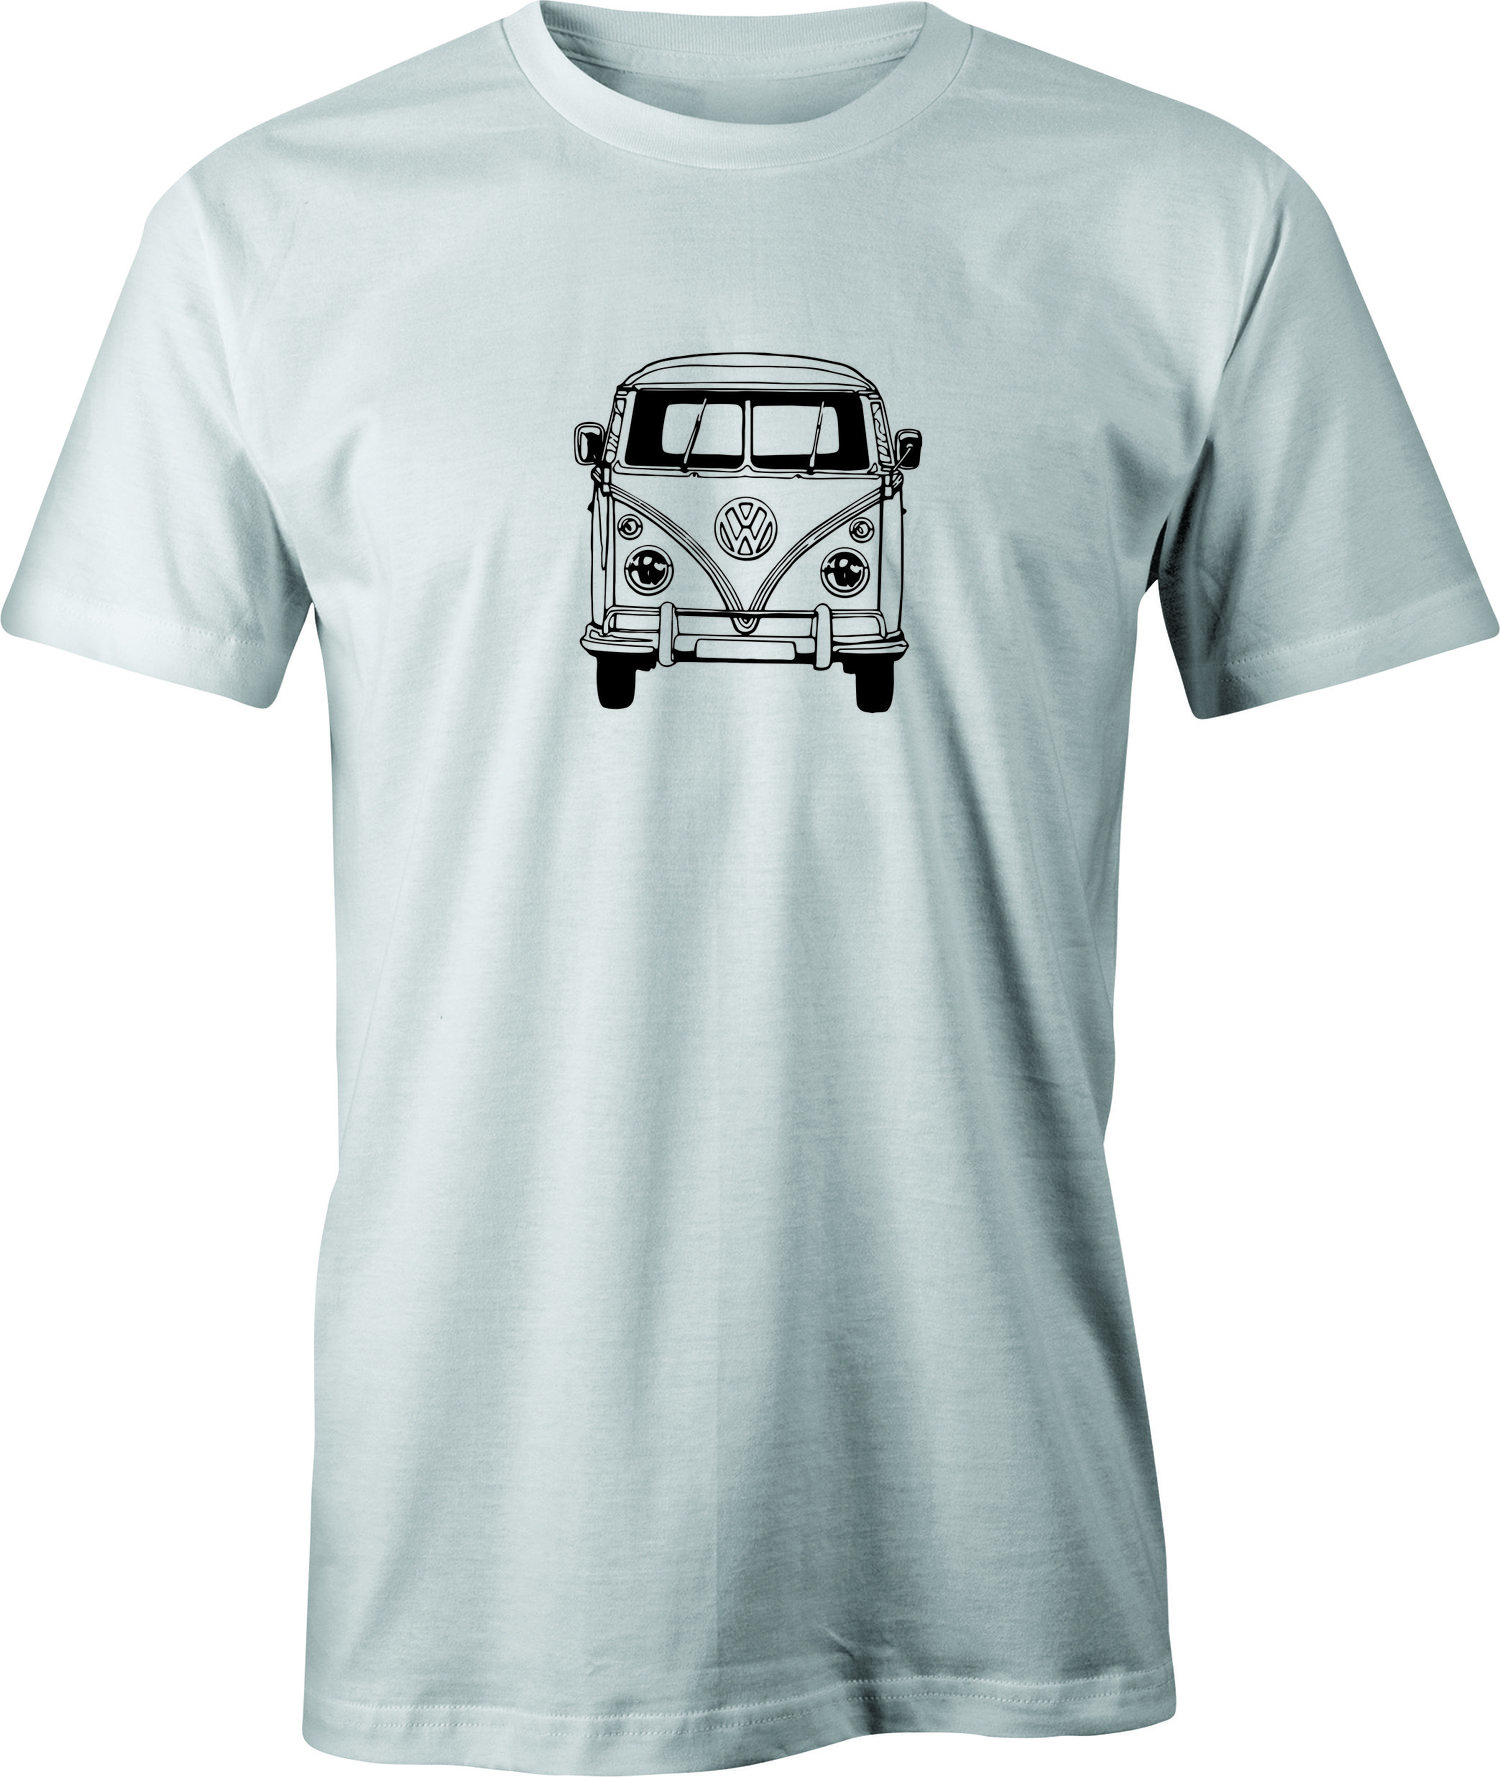 Svin værdighed terrasse 60's VW Van Drawing Printed on Men's Shirt. Free Shipping. Great Gift for  the VW microbus Type 2 fan — Custom Designed Printed T Shirts